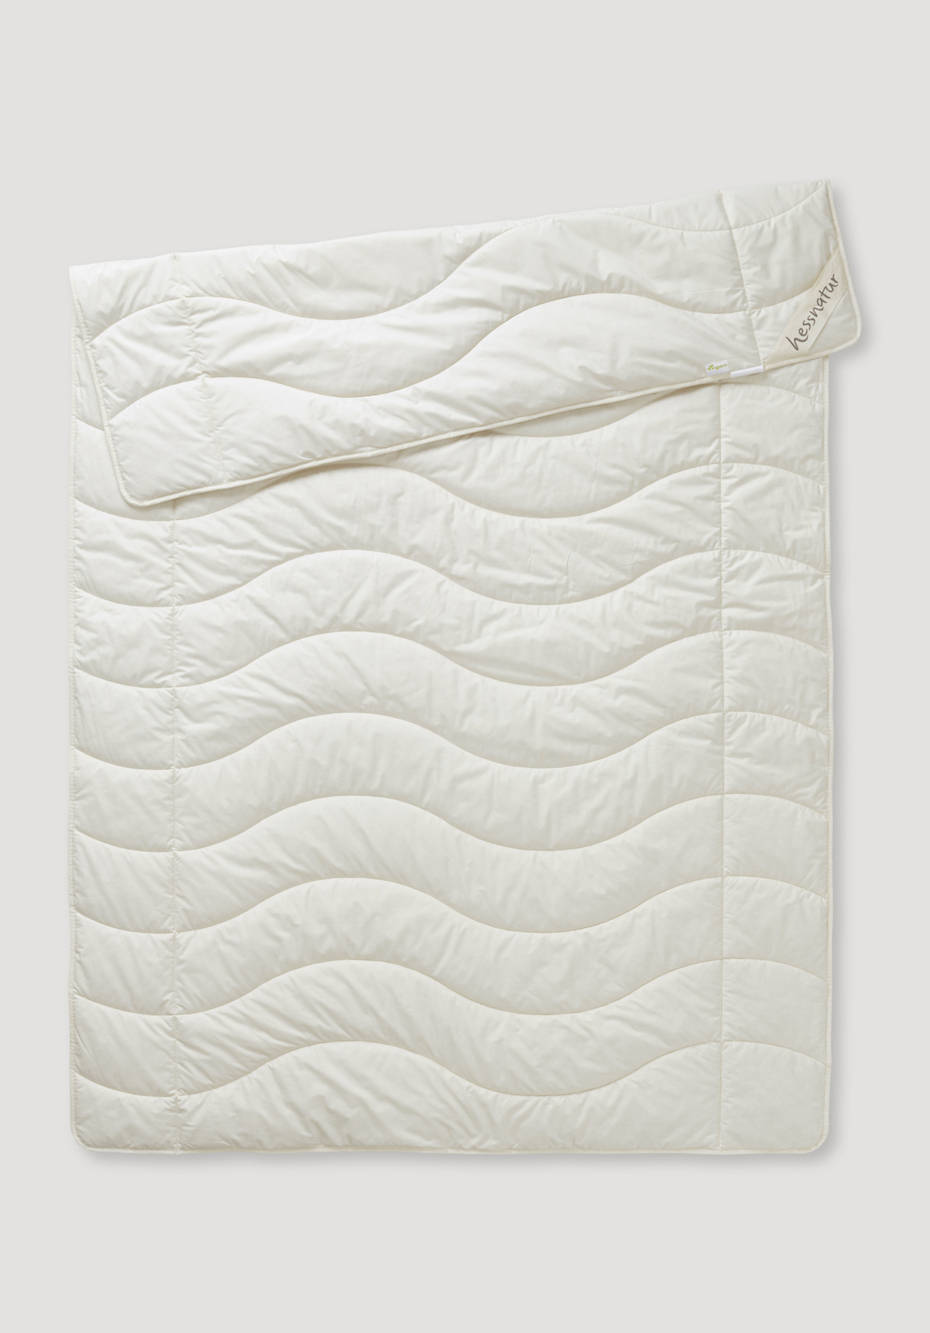 Summer blanket made of organic cotton with nettle